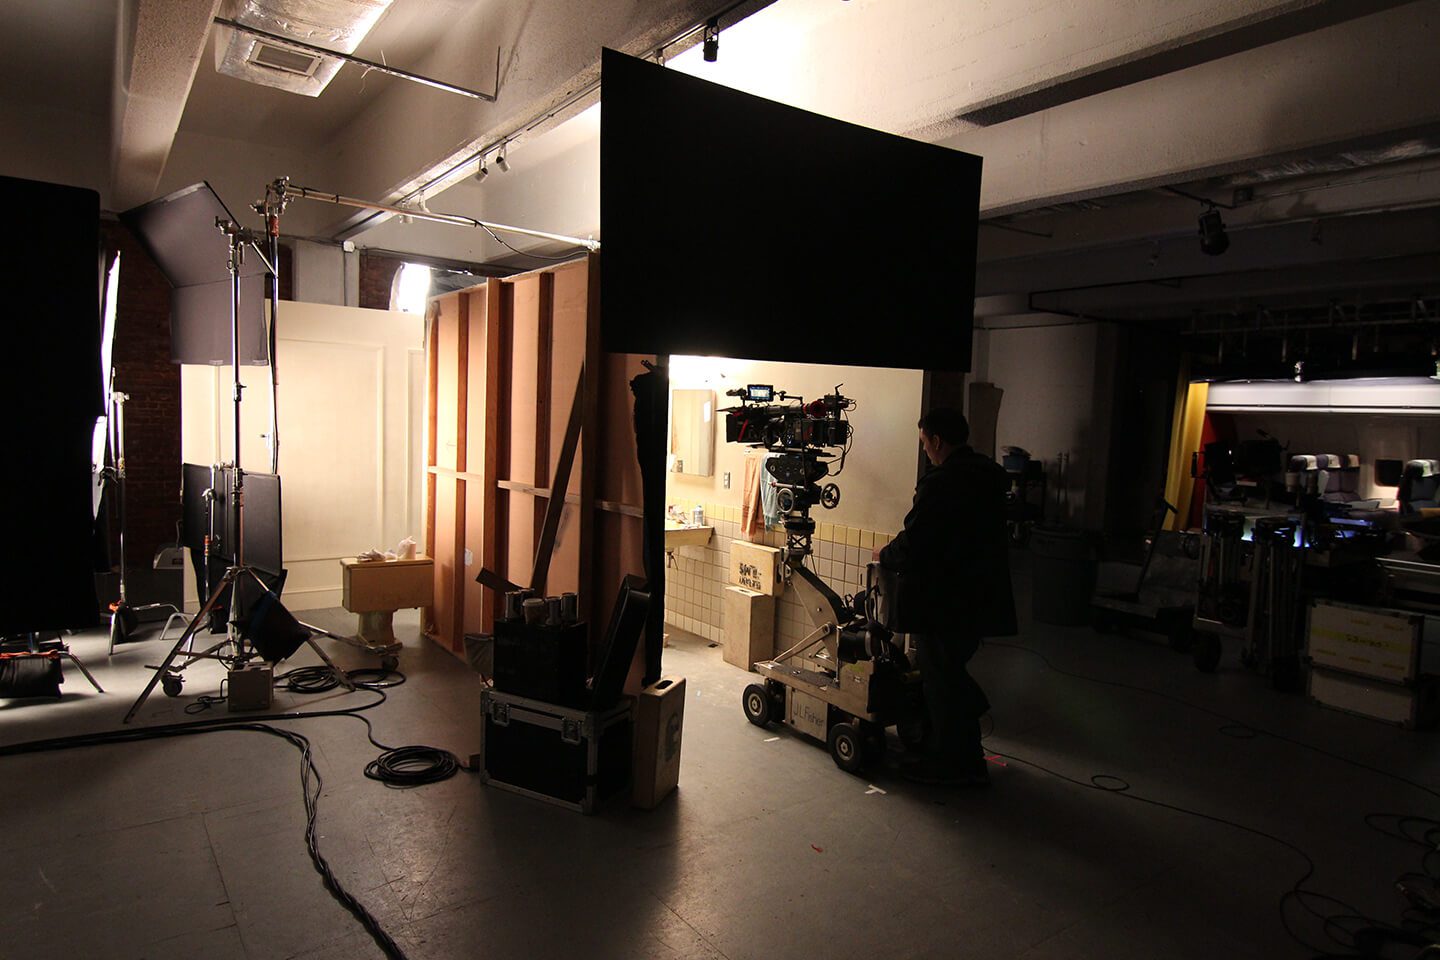 A man is filming in the studio